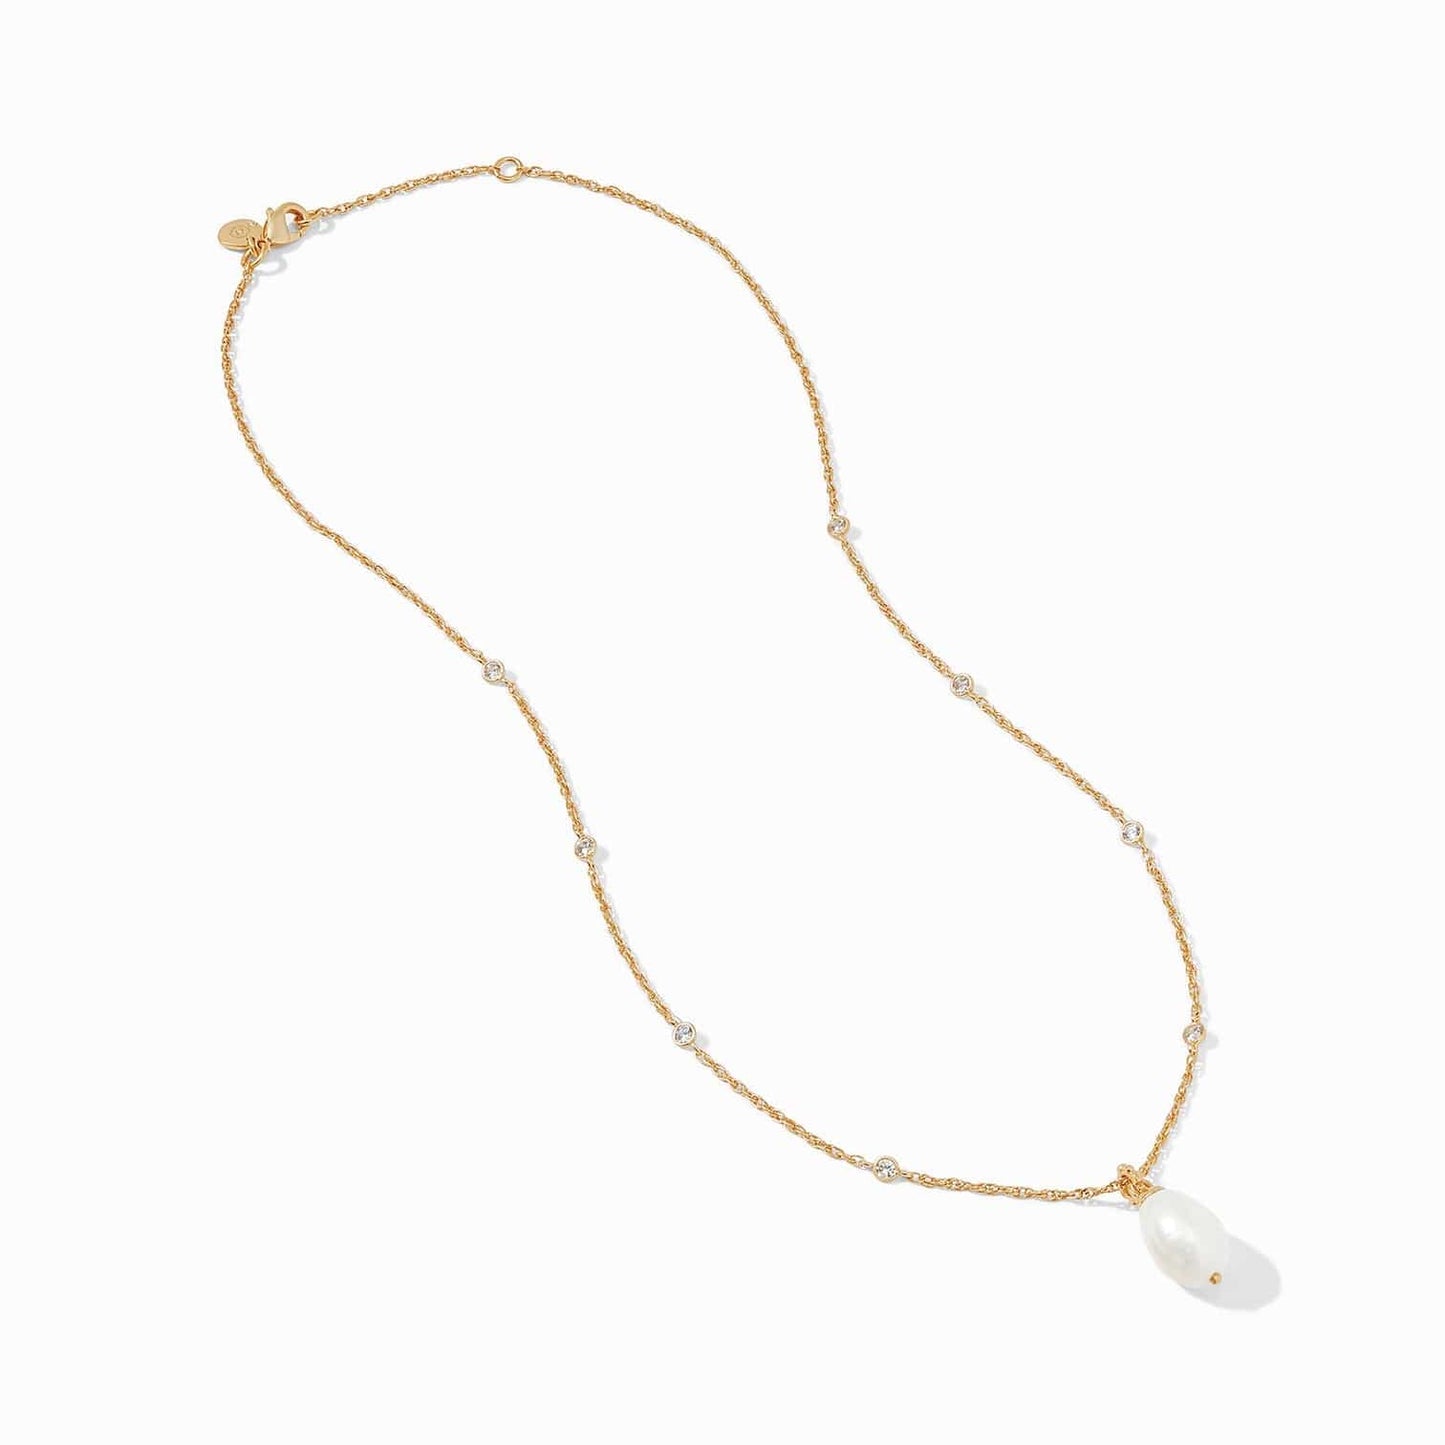 NKL-GPL Marbella Solitaire Necklace